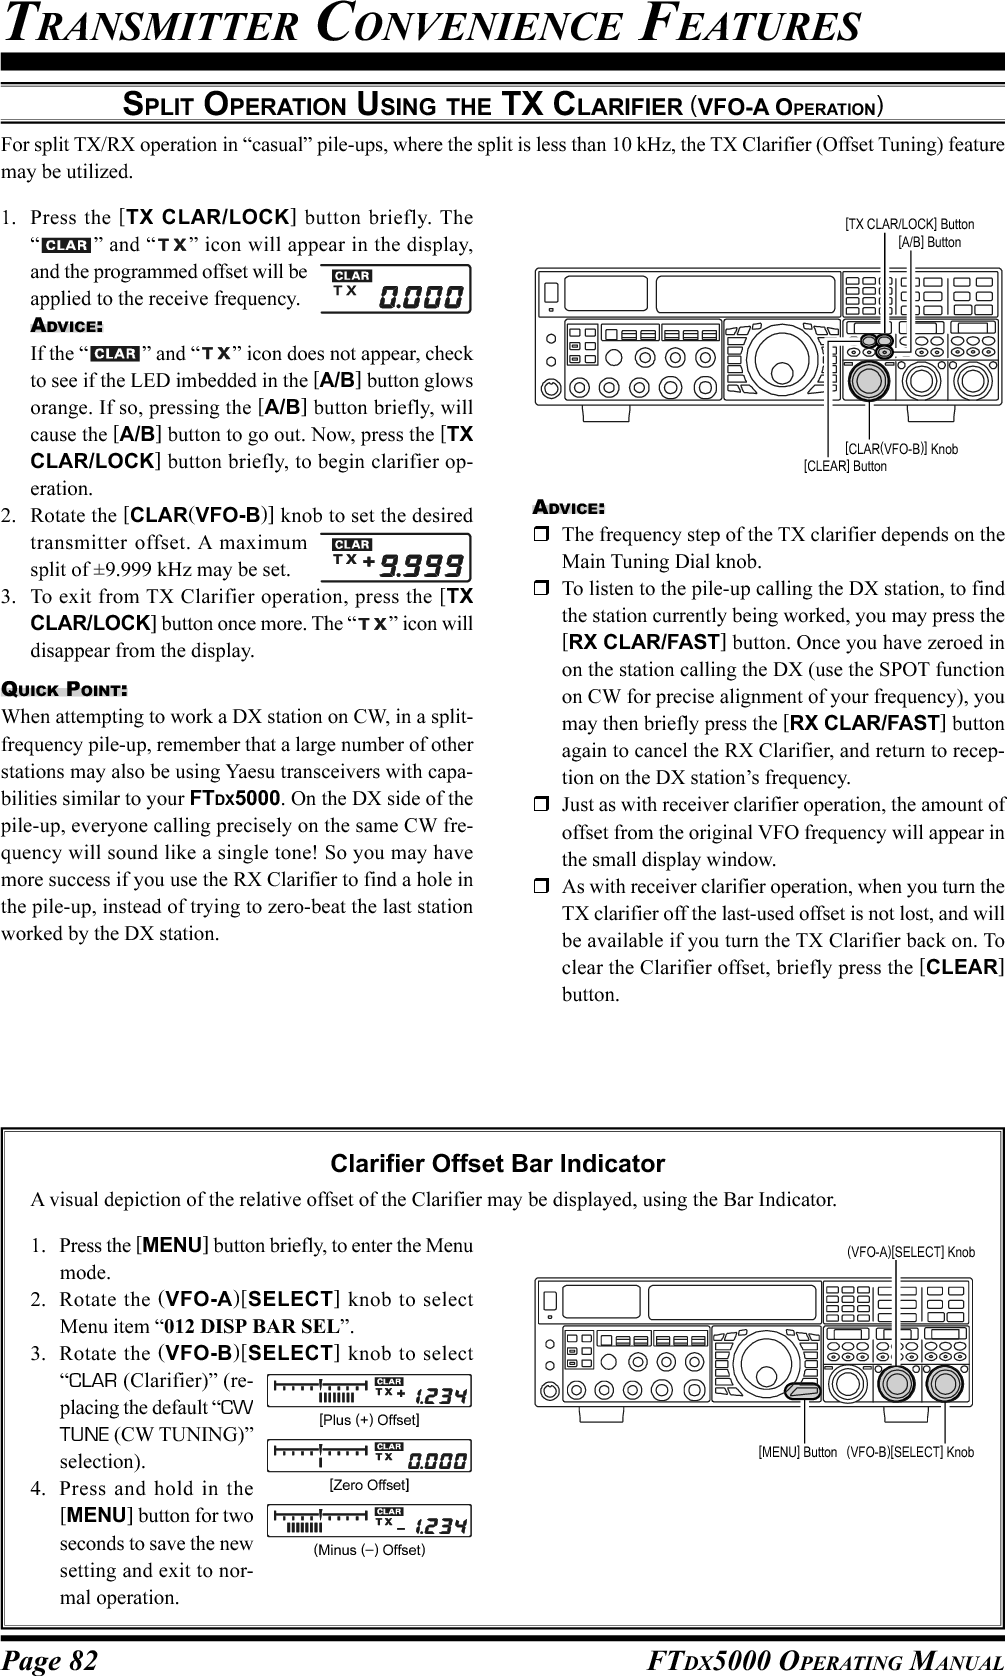 Page 82 FTDX5000 OPERATING MANUALTRANSMITTER CONVENIENCE FEATURESSPLIT OPERATION USING THE TX CLARIFIER (VFO-A OPERATION)For split TX/RX operation in “casual” pile-ups, where the split is less than 10 kHz, the TX Clarifier (Offset Tuning) featuremay be utilized.1. Press the [TX CLAR/LOCK] button briefly. The“” and “ ” icon will appear in the display,and the programmed offset will beapplied to the receive frequency.ADVICE:If the “ ” and “ ” icon does not appear, checkto see if the LED imbedded in the [A/B] button glowsorange. If so, pressing the [A/B] button briefly, willcause the [A/B] button to go out. Now, press the [TXCLAR/LOCK] button briefly, to begin clarifier op-eration.2. Rotate the [CLAR(VFO-B)] knob to set the desiredtransmitter offset. A maximumsplit of ±9.999 kHz may be set.3. To exit from TX Clarifier operation, press the [TXCLAR/LOCK] button once more. The “ ” icon willdisappear from the display.QUICK POINT:When attempting to work a DX station on CW, in a split-frequency pile-up, remember that a large number of otherstations may also be using Yaesu transceivers with capa-bilities similar to your FTDX5000. On the DX side of thepile-up, everyone calling precisely on the same CW fre-quency will sound like a single tone! So you may havemore success if you use the RX Clarifier to find a hole inthe pile-up, instead of trying to zero-beat the last stationworked by the DX station.Clarifier Offset Bar IndicatorA visual depiction of the relative offset of the Clarifier may be displayed, using the Bar Indicator.1. Press the [MENU] button briefly, to enter the Menumode.2. Rotate the (VFO-A)[SELECT] knob to selectMenu item “012 DISP BAR SEL”.3. Rotate the (VFO-B)[SELECT] knob to select“CLAR (Clarifier)” (re-placing the default “CWTUNE (CW TUNING)”selection).4. Press and hold in the[MENU] button for twoseconds to save the newsetting and exit to nor-mal operation.ADVICE:The frequency step of the TX clarifier depends on theMain Tuning Dial knob.To listen to the pile-up calling the DX station, to findthe station currently being worked, you may press the[RX CLAR/FAST] button. Once you have zeroed inon the station calling the DX (use the SPOT functionon CW for precise alignment of your frequency), youmay then briefly press the [RX CLAR/FAST] buttonagain to cancel the RX Clarifier, and return to recep-tion on the DX station’s frequency.Just as with receiver clarifier operation, the amount ofoffset from the original VFO frequency will appear inthe small display window.As with receiver clarifier operation, when you turn theTX clarifier off the last-used offset is not lost, and willbe available if you turn the TX Clarifier back on. Toclear the Clarifier offset, briefly press the [CLEAR]button.[CLAR(VFO-B)] Knob[CLEAR] Button[TX CLAR/LOCK] Button[A/B] Button[Plus (+) Offset][Zero Offset](Minus (–) Offset)(VFO-B)[SELECT] Knob[MENU] Button(VFO-A)[SELECT] Knob